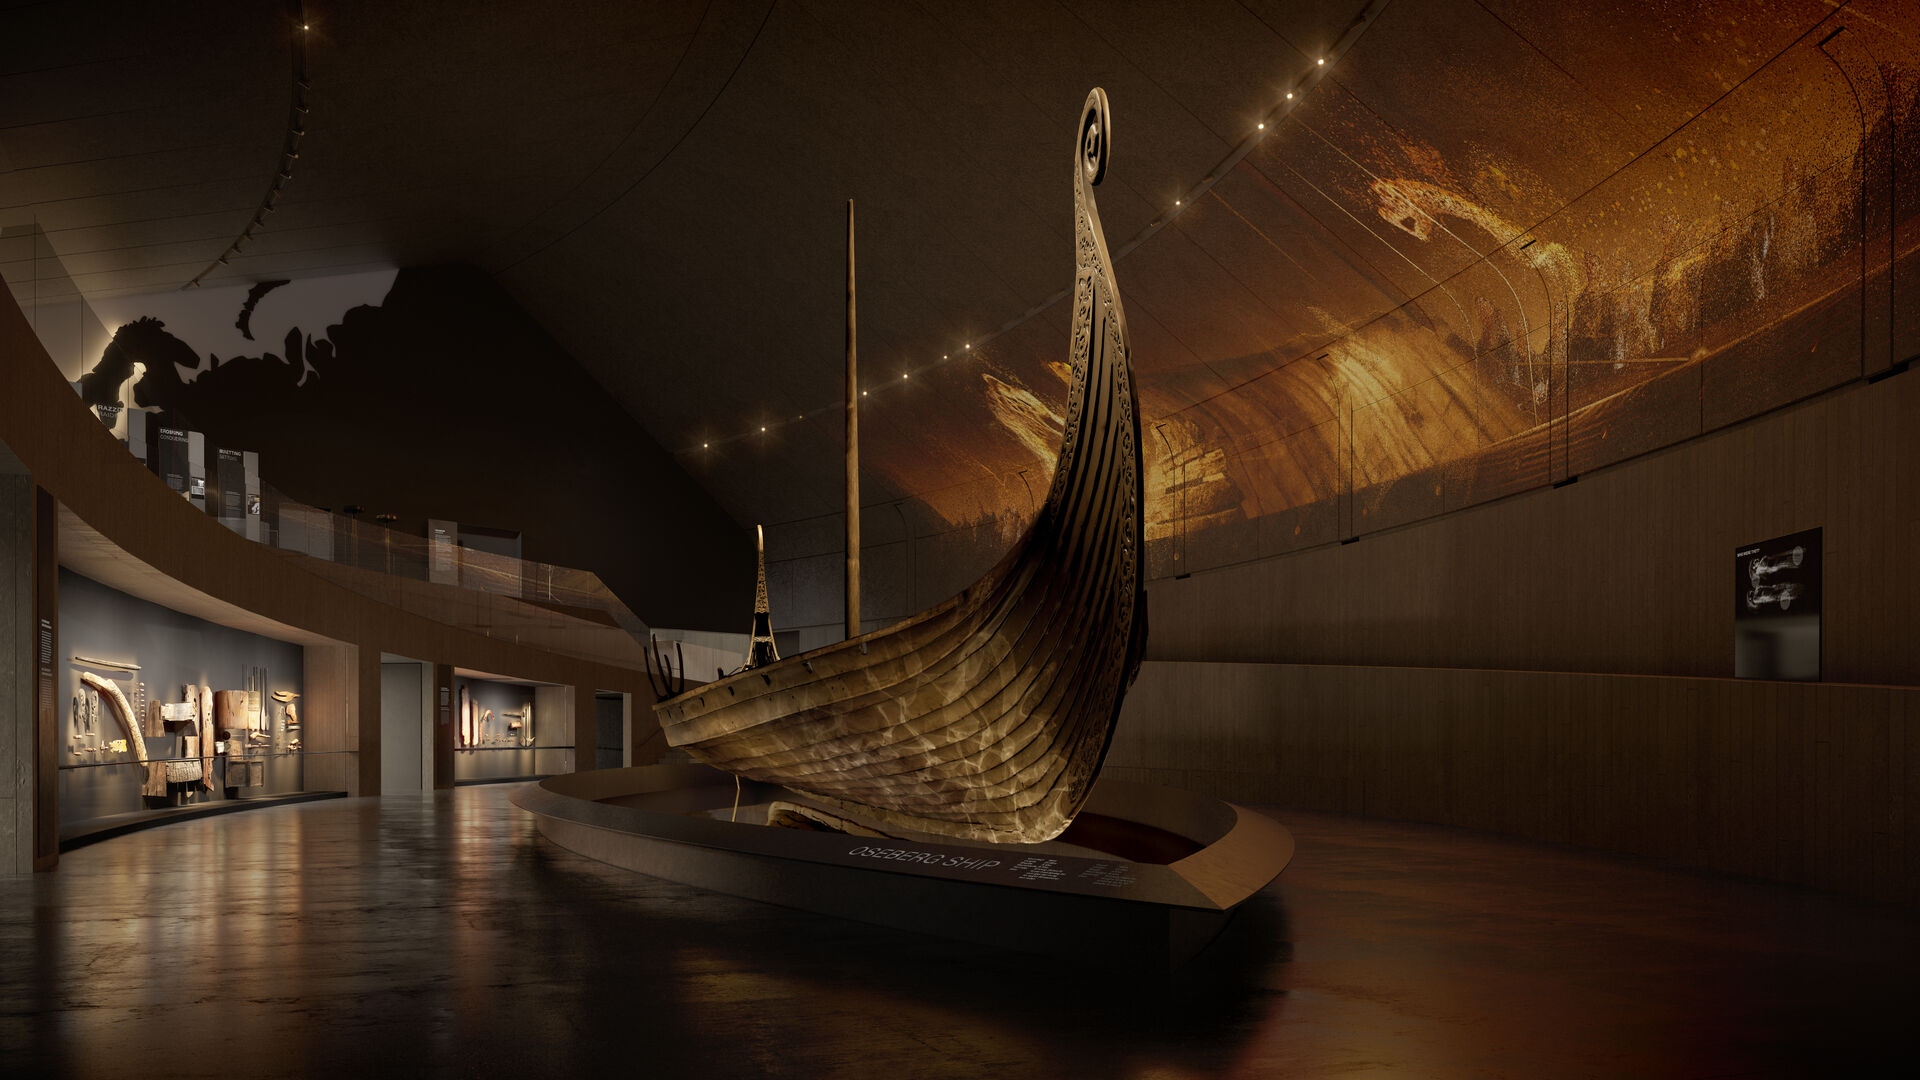 Illustration of a viking ship in an exhibition.